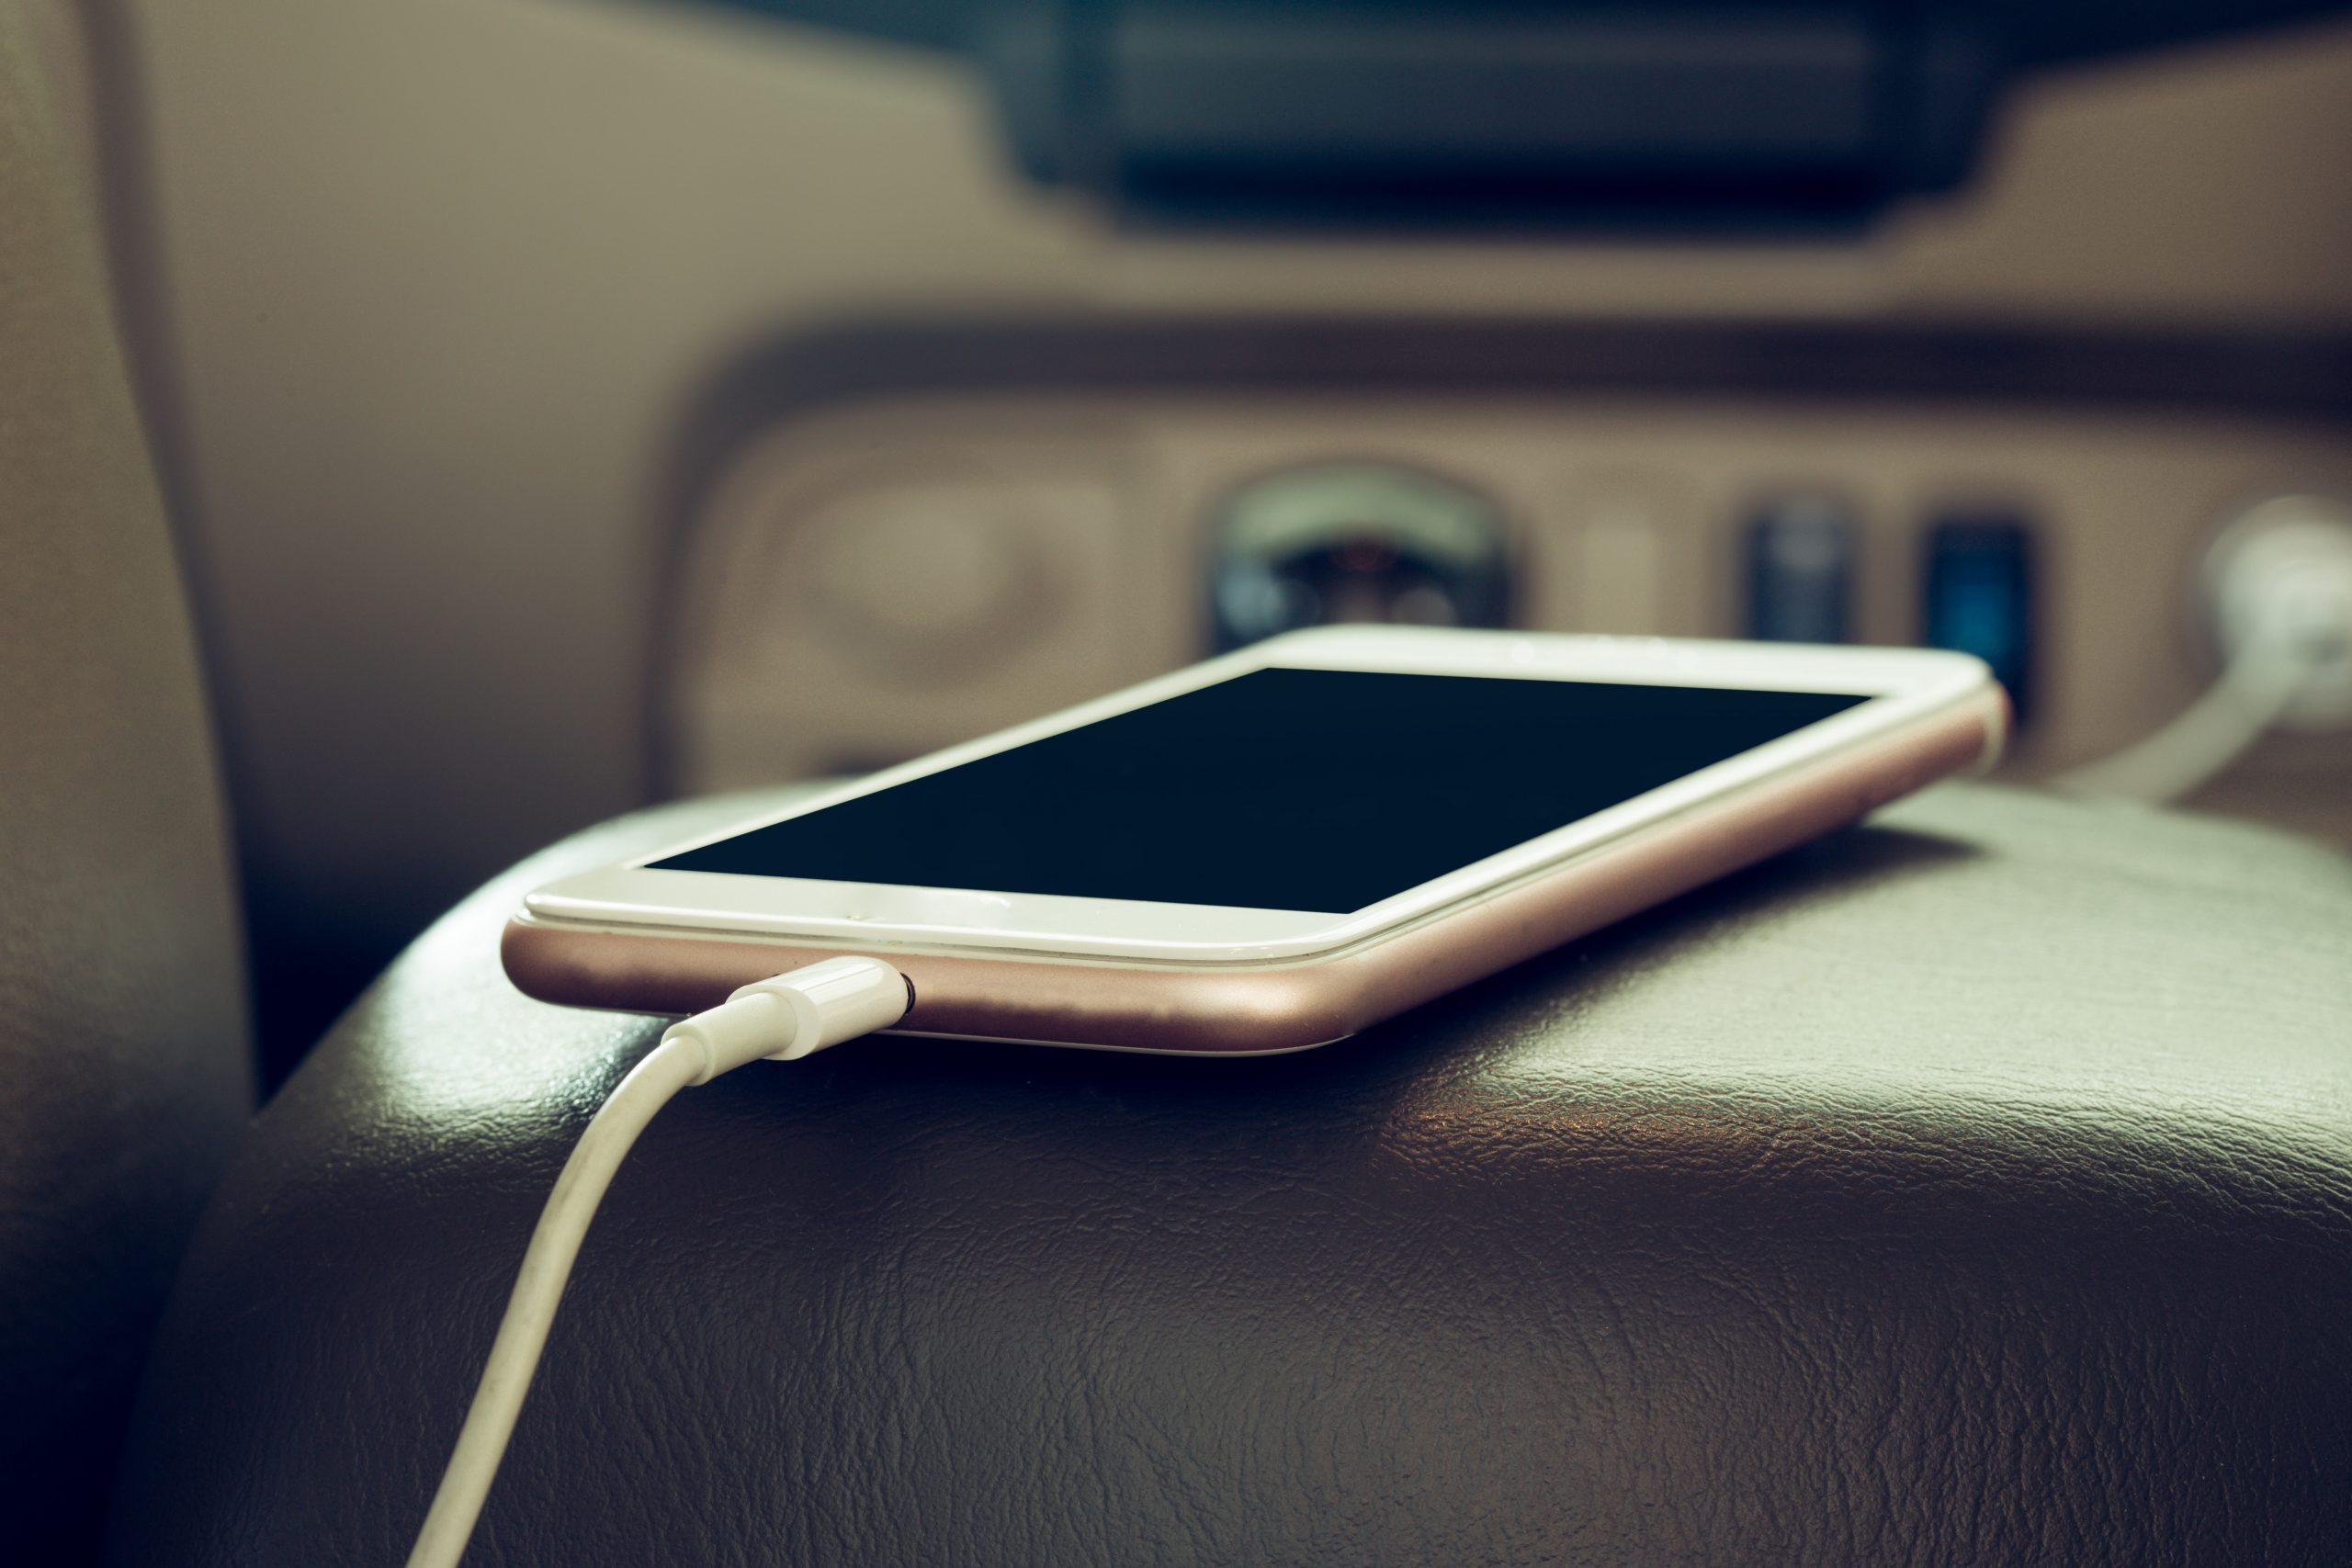 Why You Should Stop Charging Your Phone in Your Car